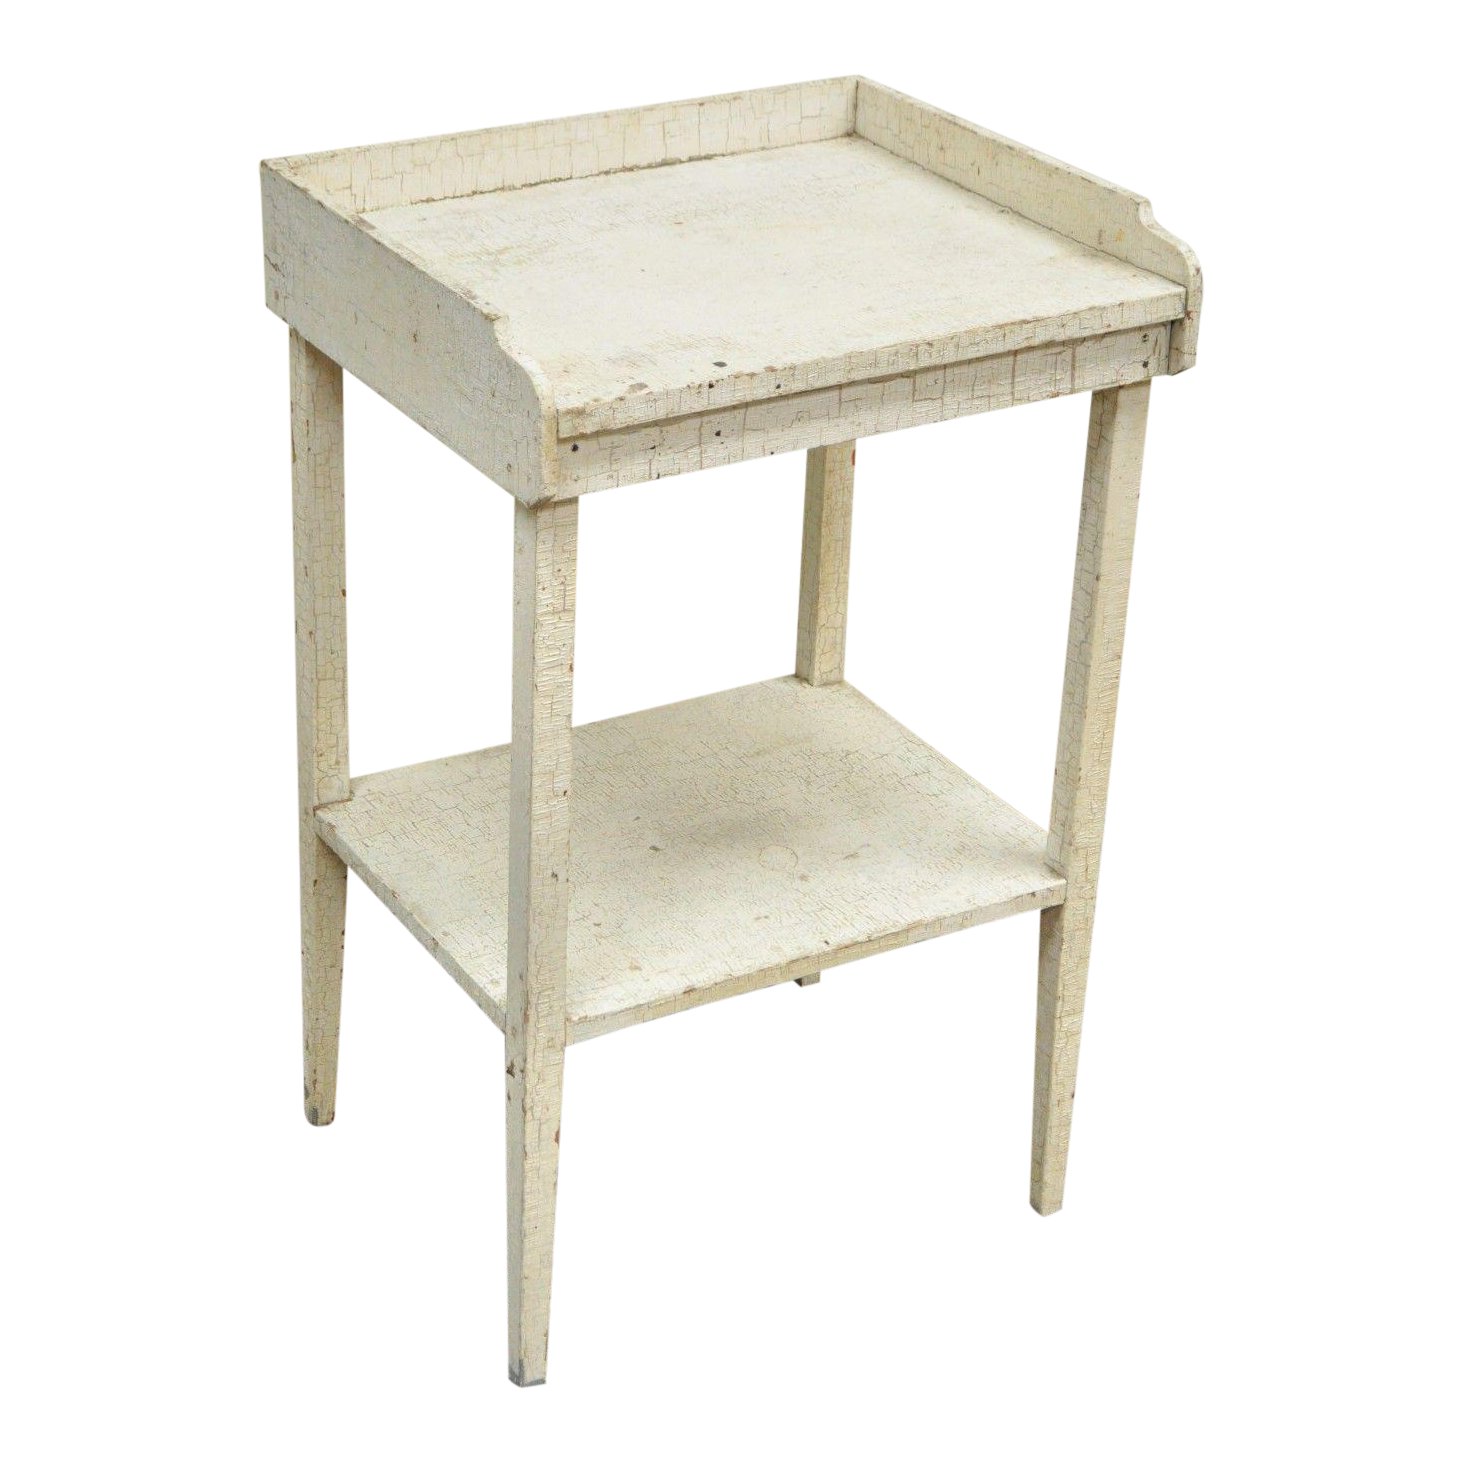 antique white distress painted pine tier accent side table rustic primitive wood chairish trestle dining basket coffee cherry end tables with drawer koncept lighting round